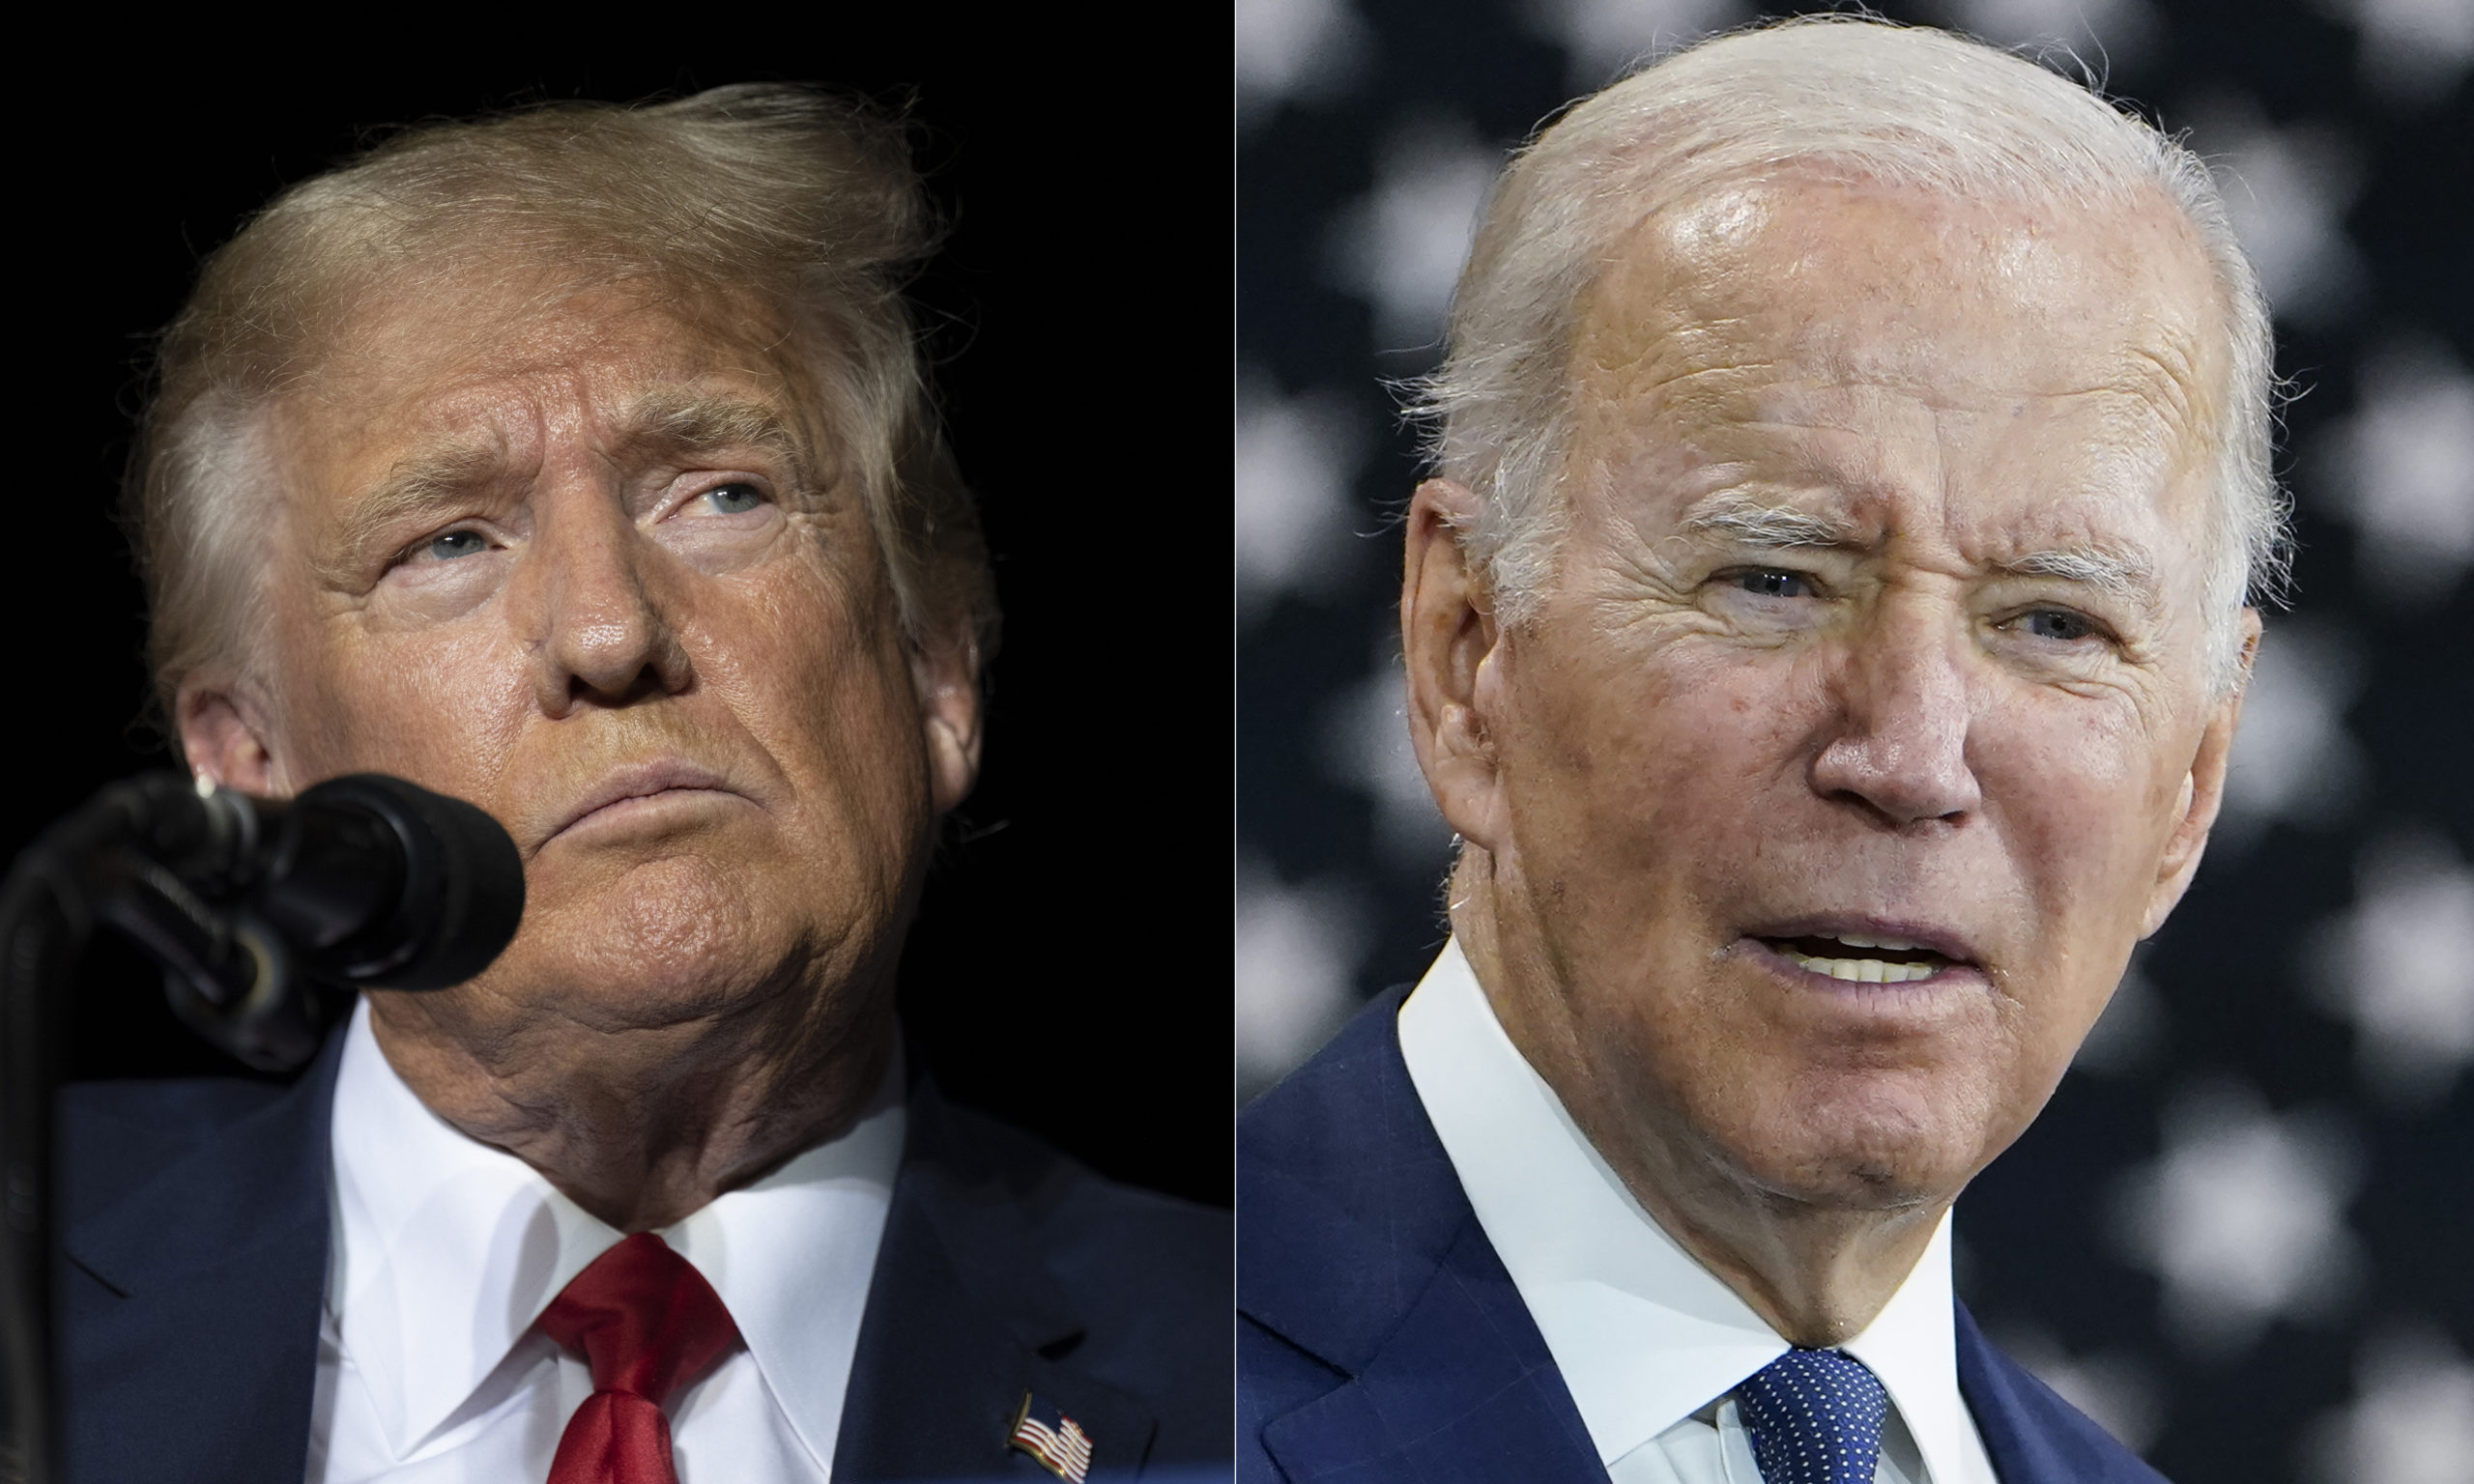 This combination of photos shows former President Donald Trump, left, and President Joe Biden, righ...